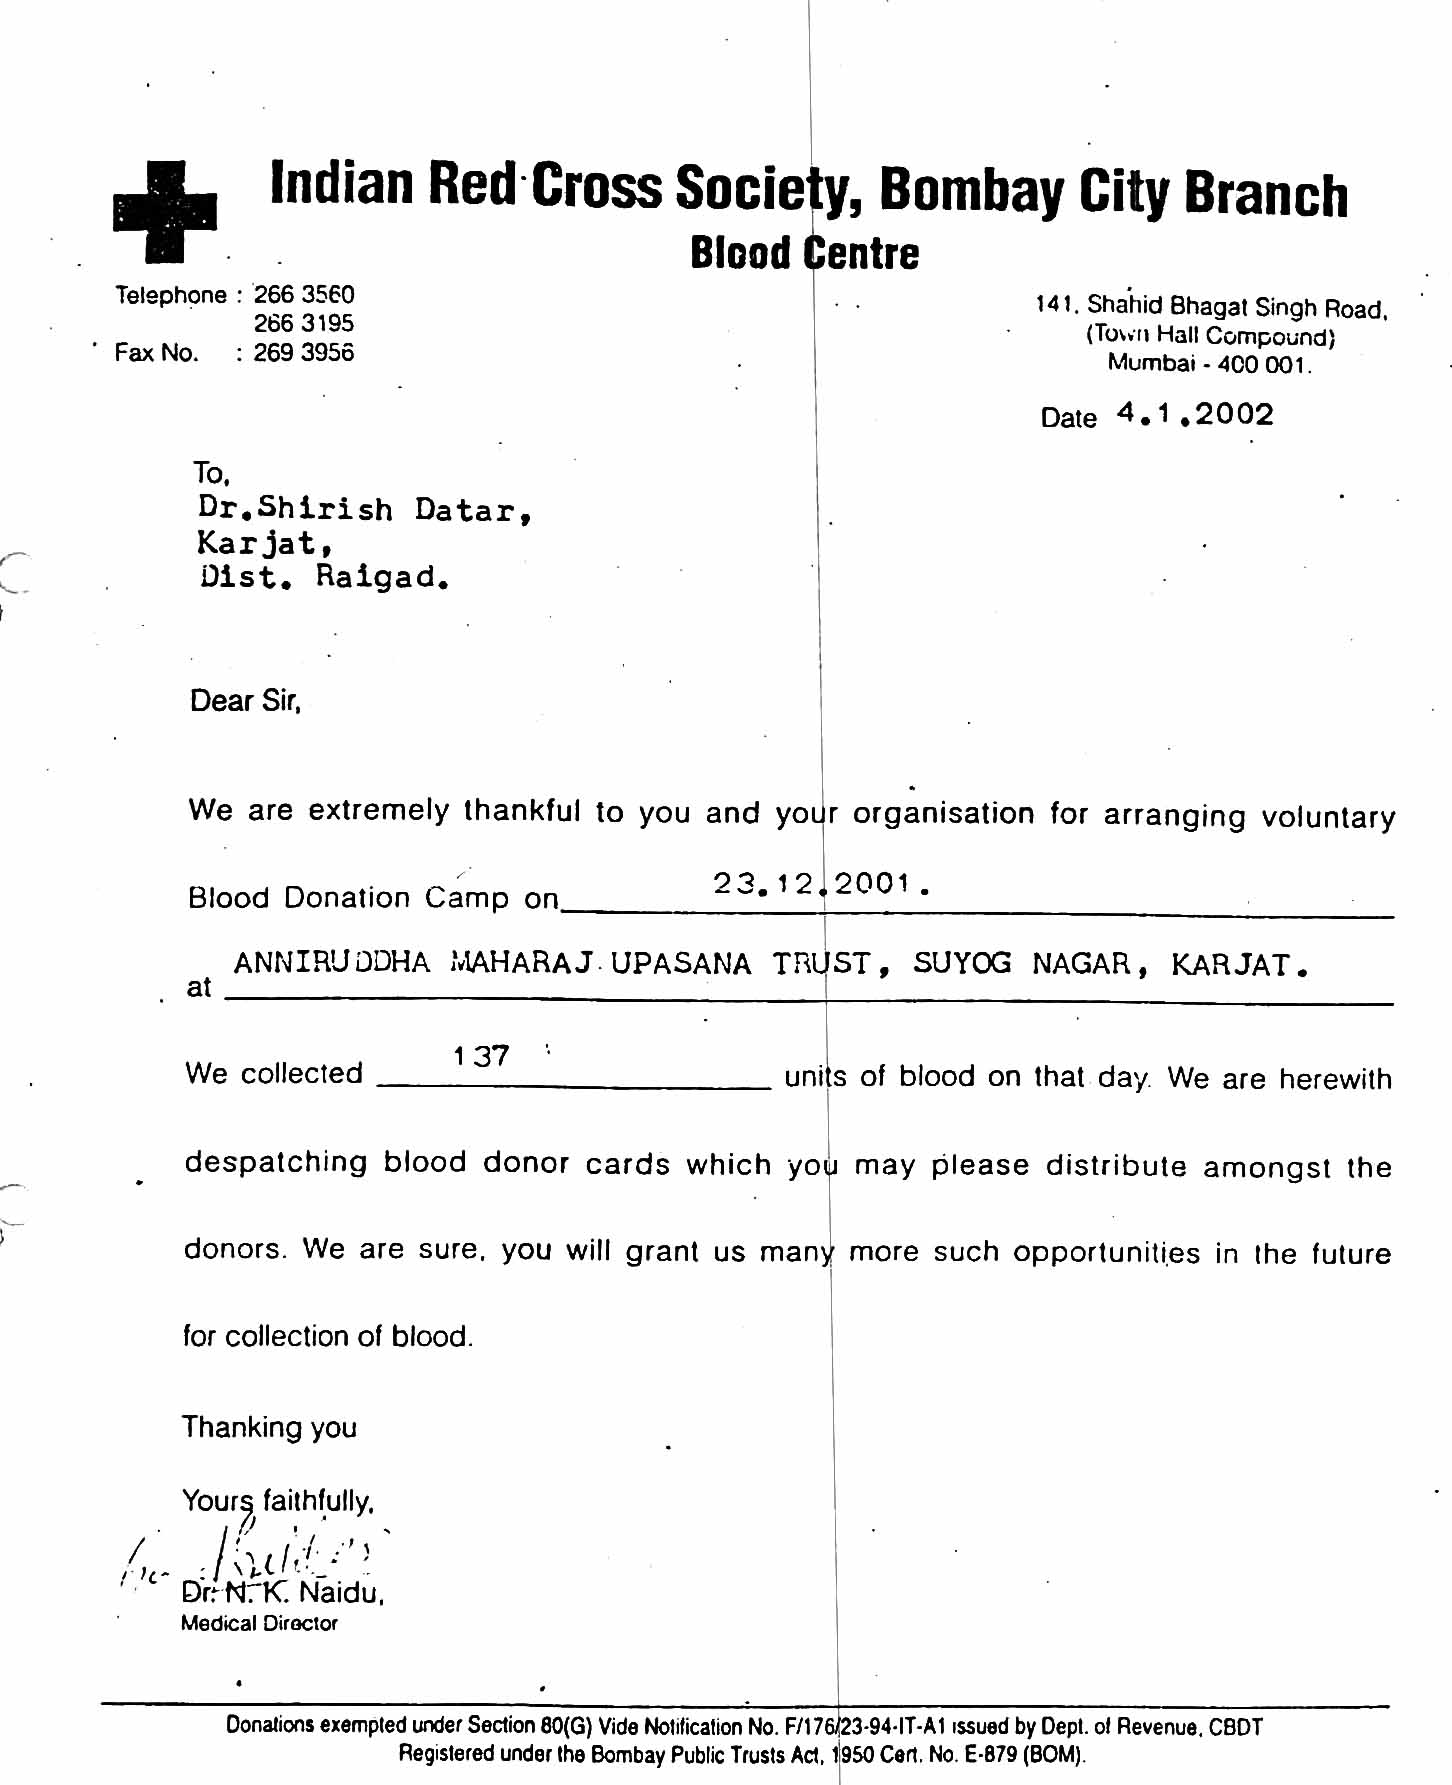 Appreciation-Letter from Indian Red Cross 2002-for-Aniruddhafoundation-Compassion-Social-services